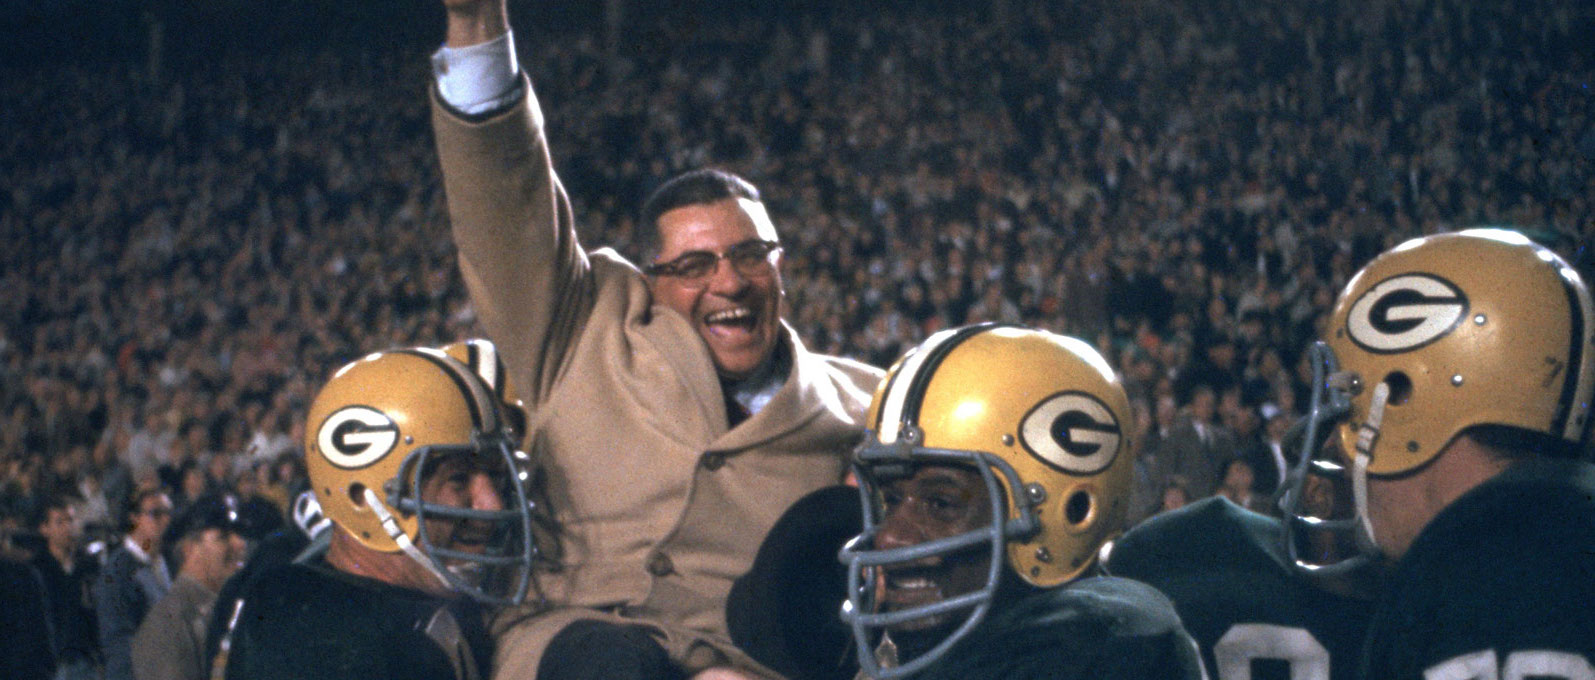 Revealed-How-Respeecher-Took-Part-in-Creating-a-Digital-Vince-Lombardi-for-Super-Bowl-LV-acse-study